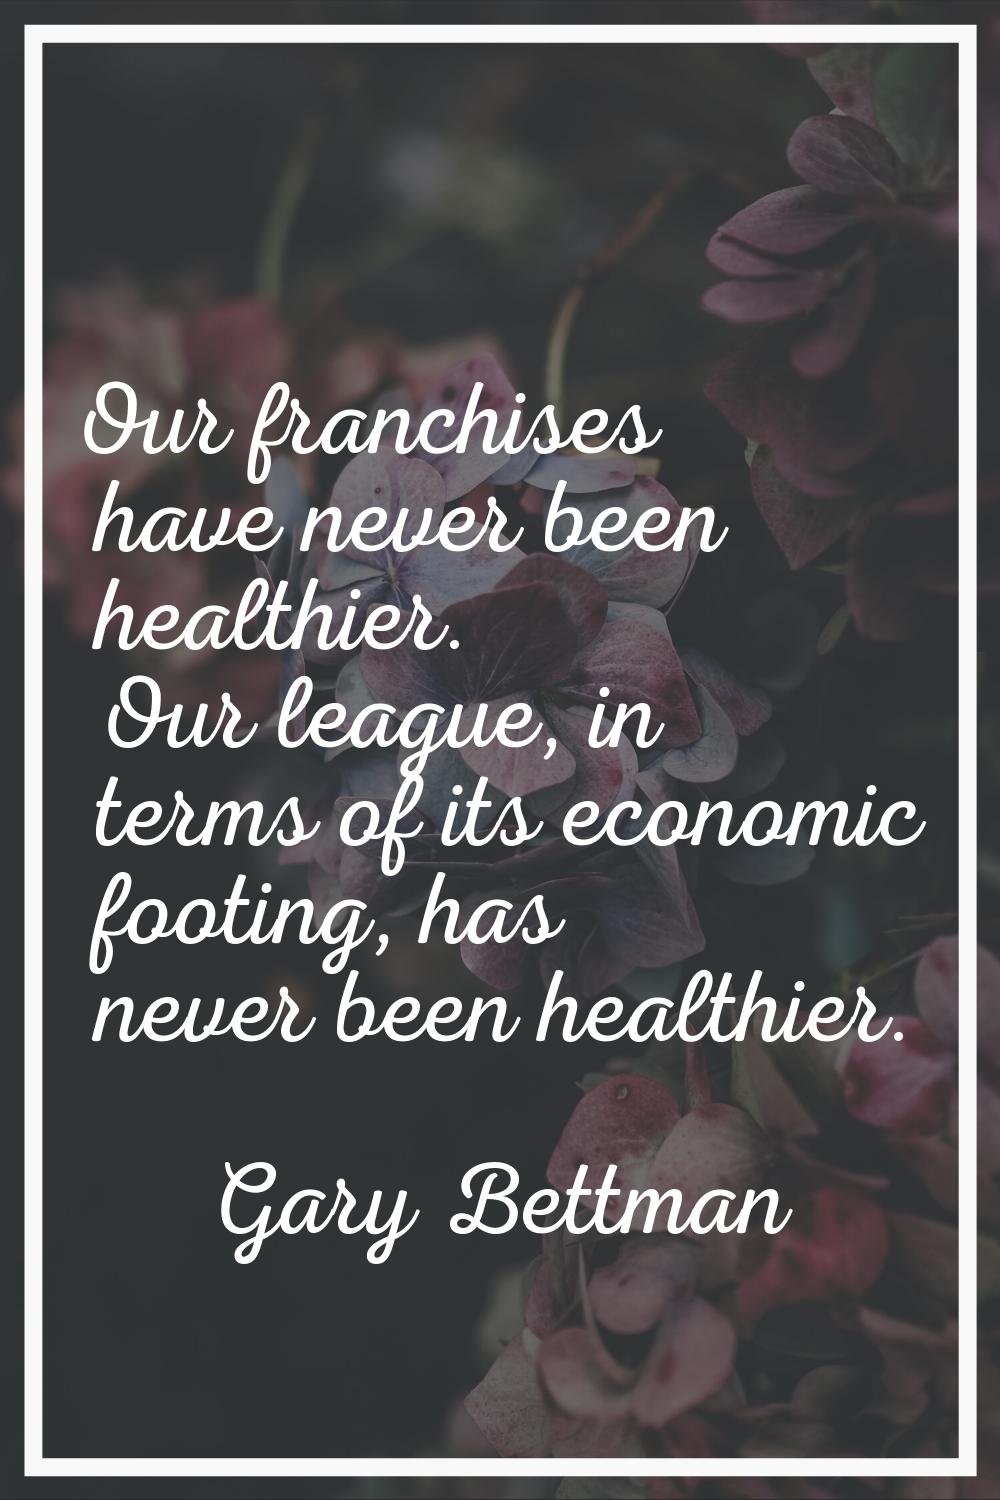 Our franchises have never been healthier. Our league, in terms of its economic footing, has never b